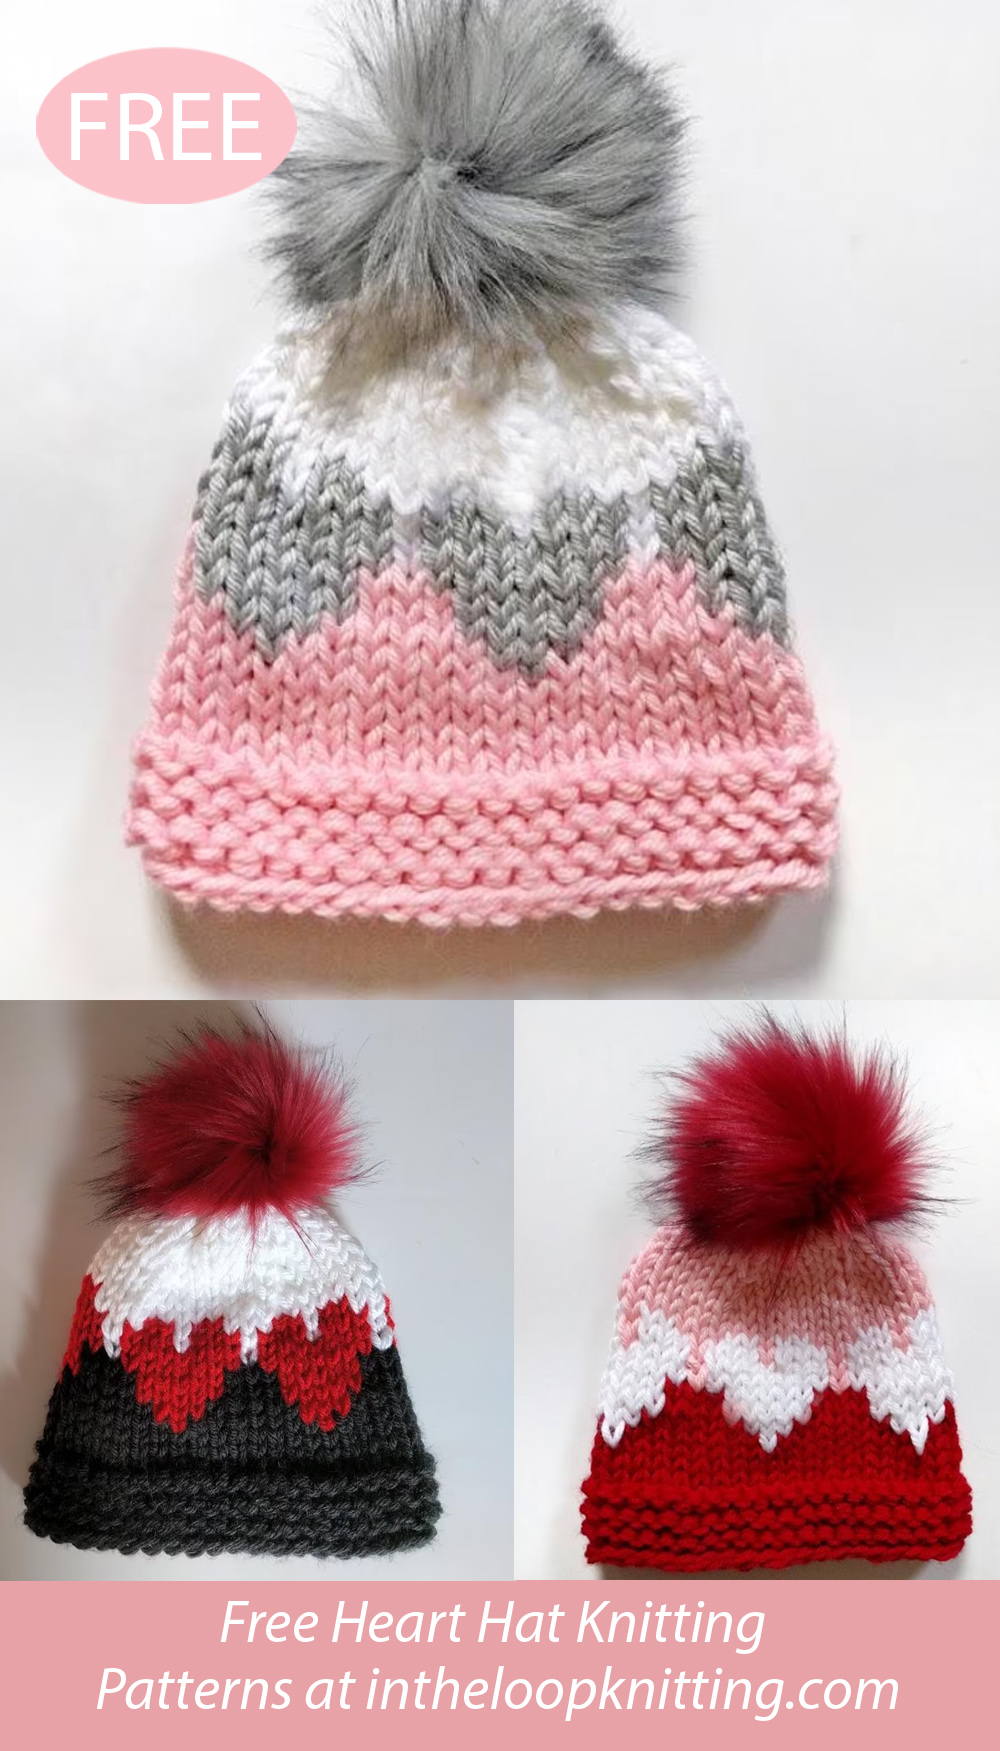 Free Queen of Hearts Hat Knitting Pattern